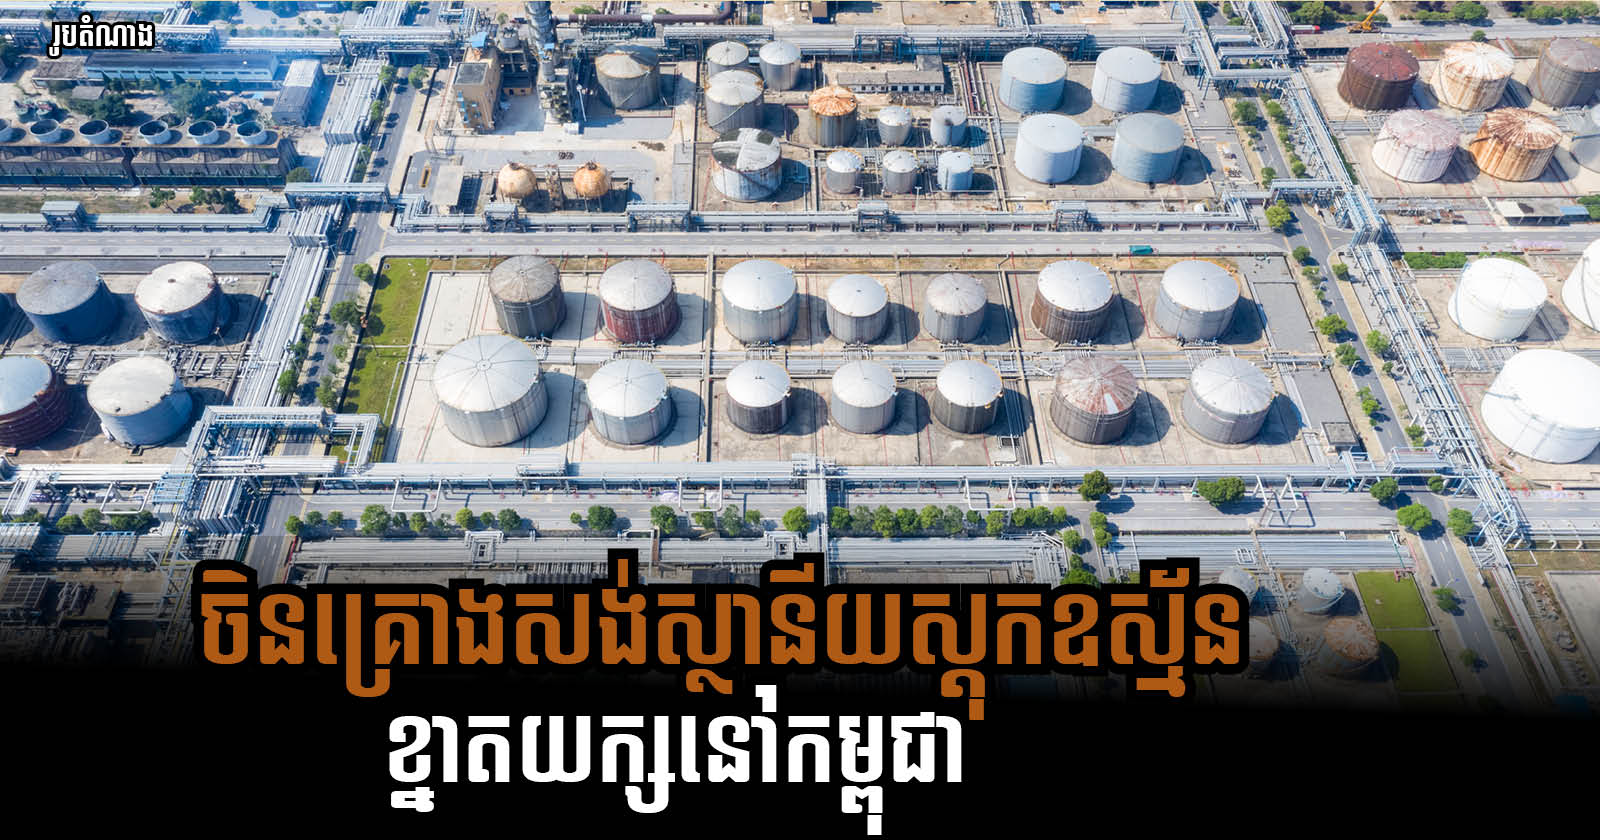 CNGC to Build Large-Scale LNG Terminal and Network in Phnom Penh